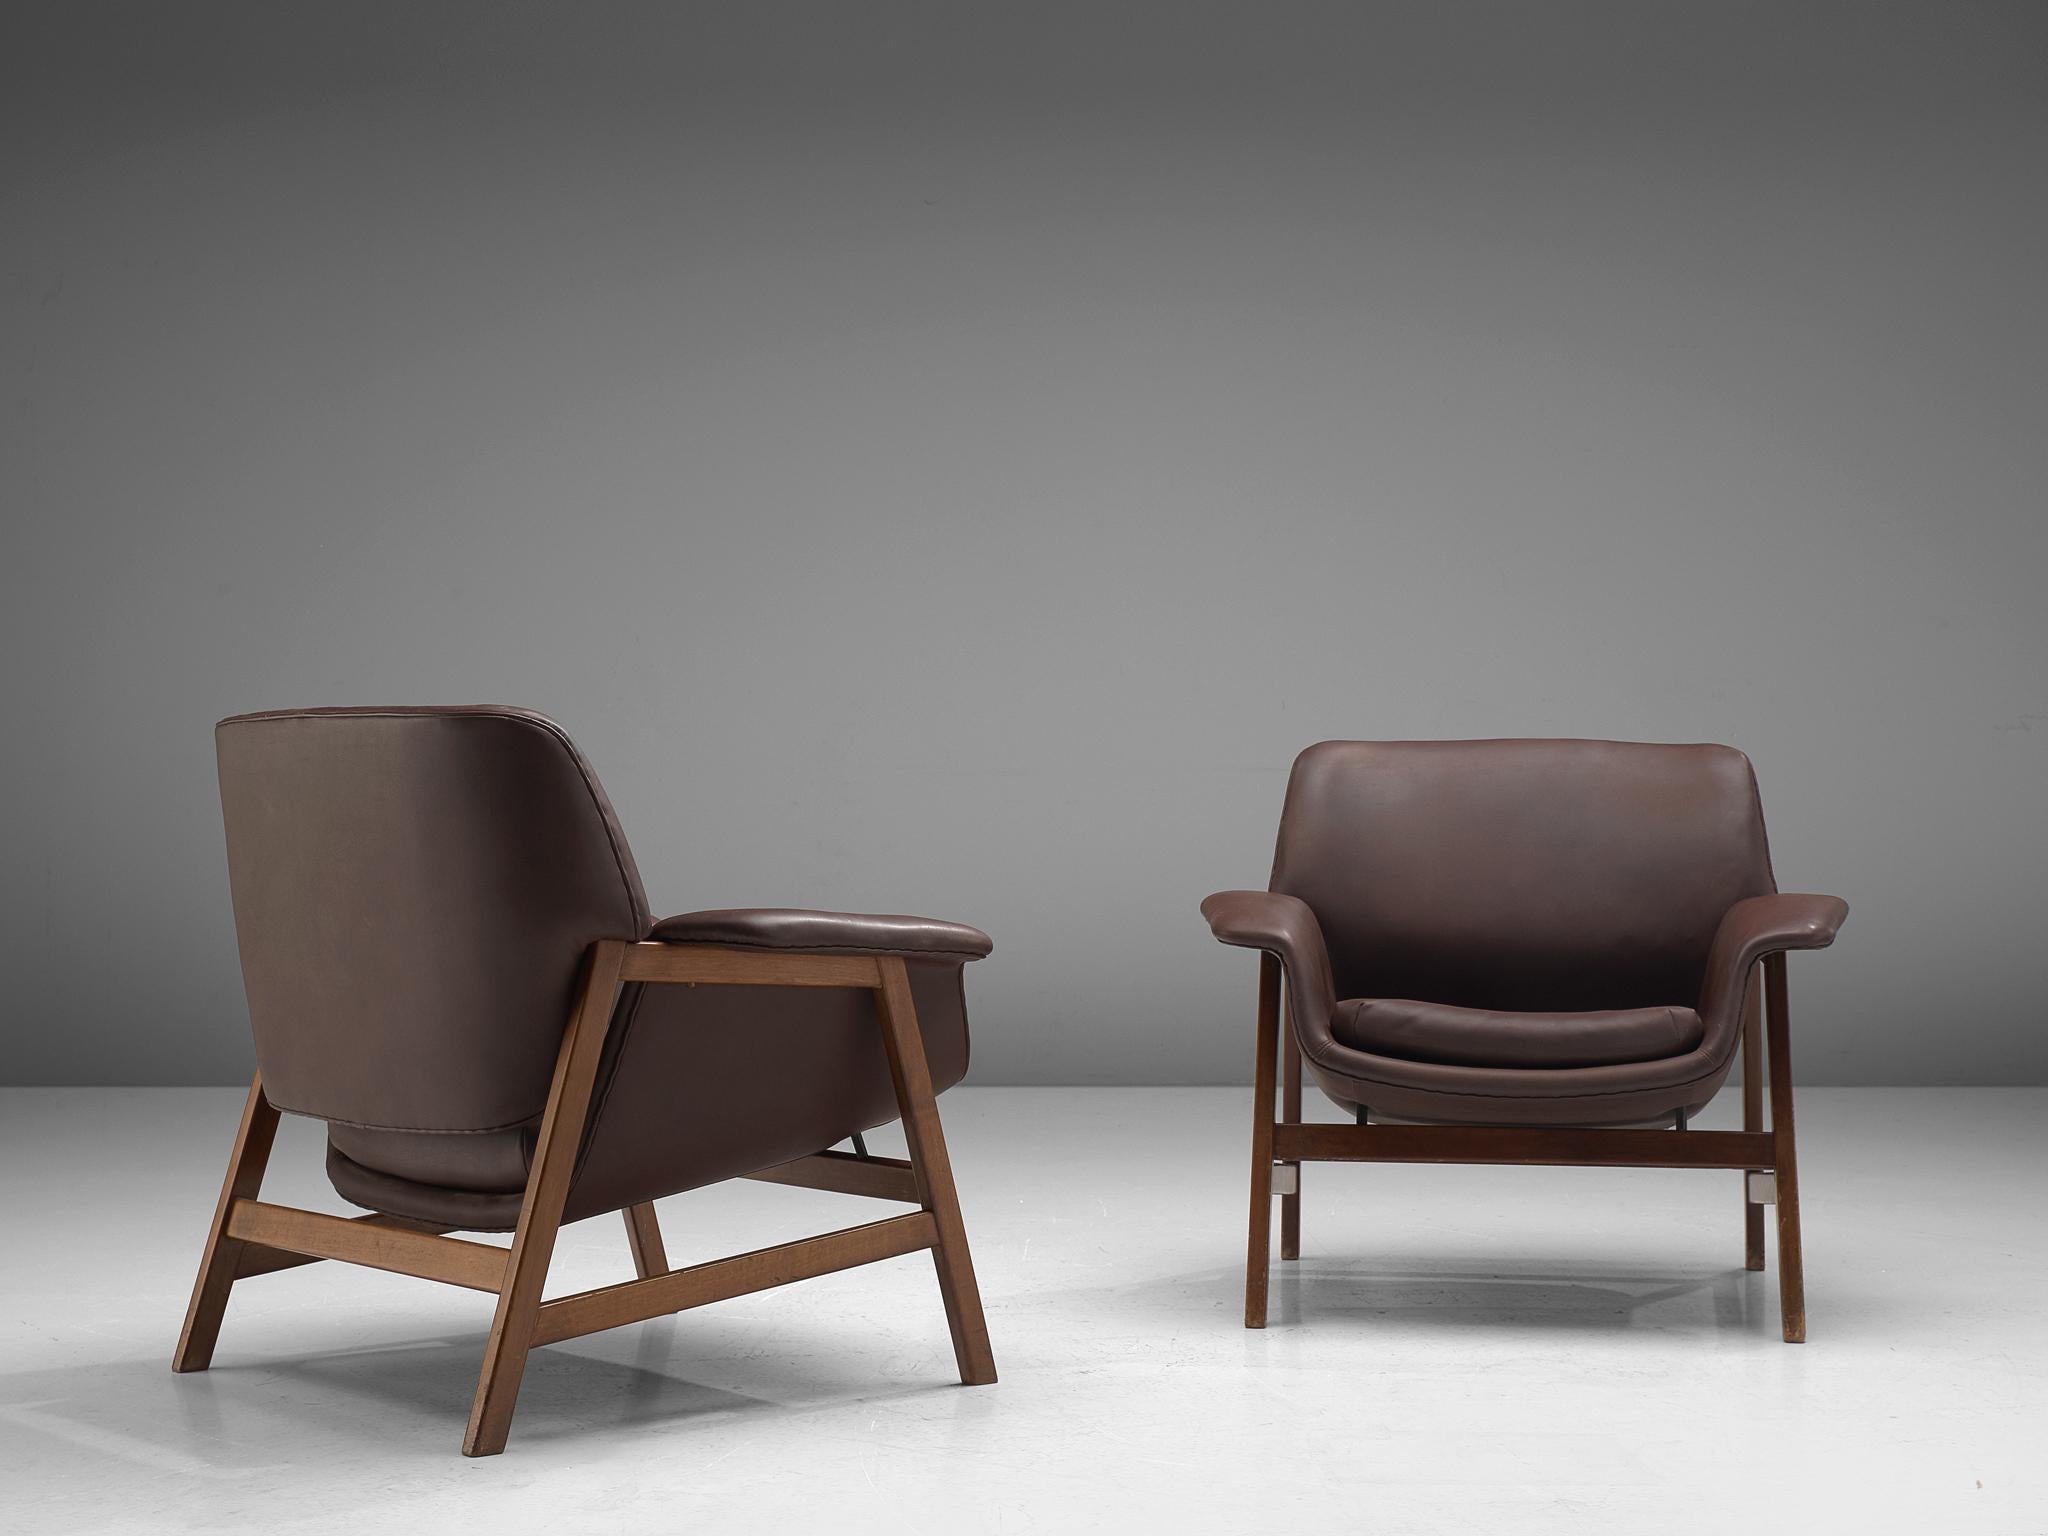 Gianfranco Frattini for Cassina, pair of customizable '849' easy chairs, walnut and leather, Italy, 1956

Wonderful pair of lounge chairs by Gianfrano Frattini for Cassina. This model features a walnut frame which holds the seat and backrest. A